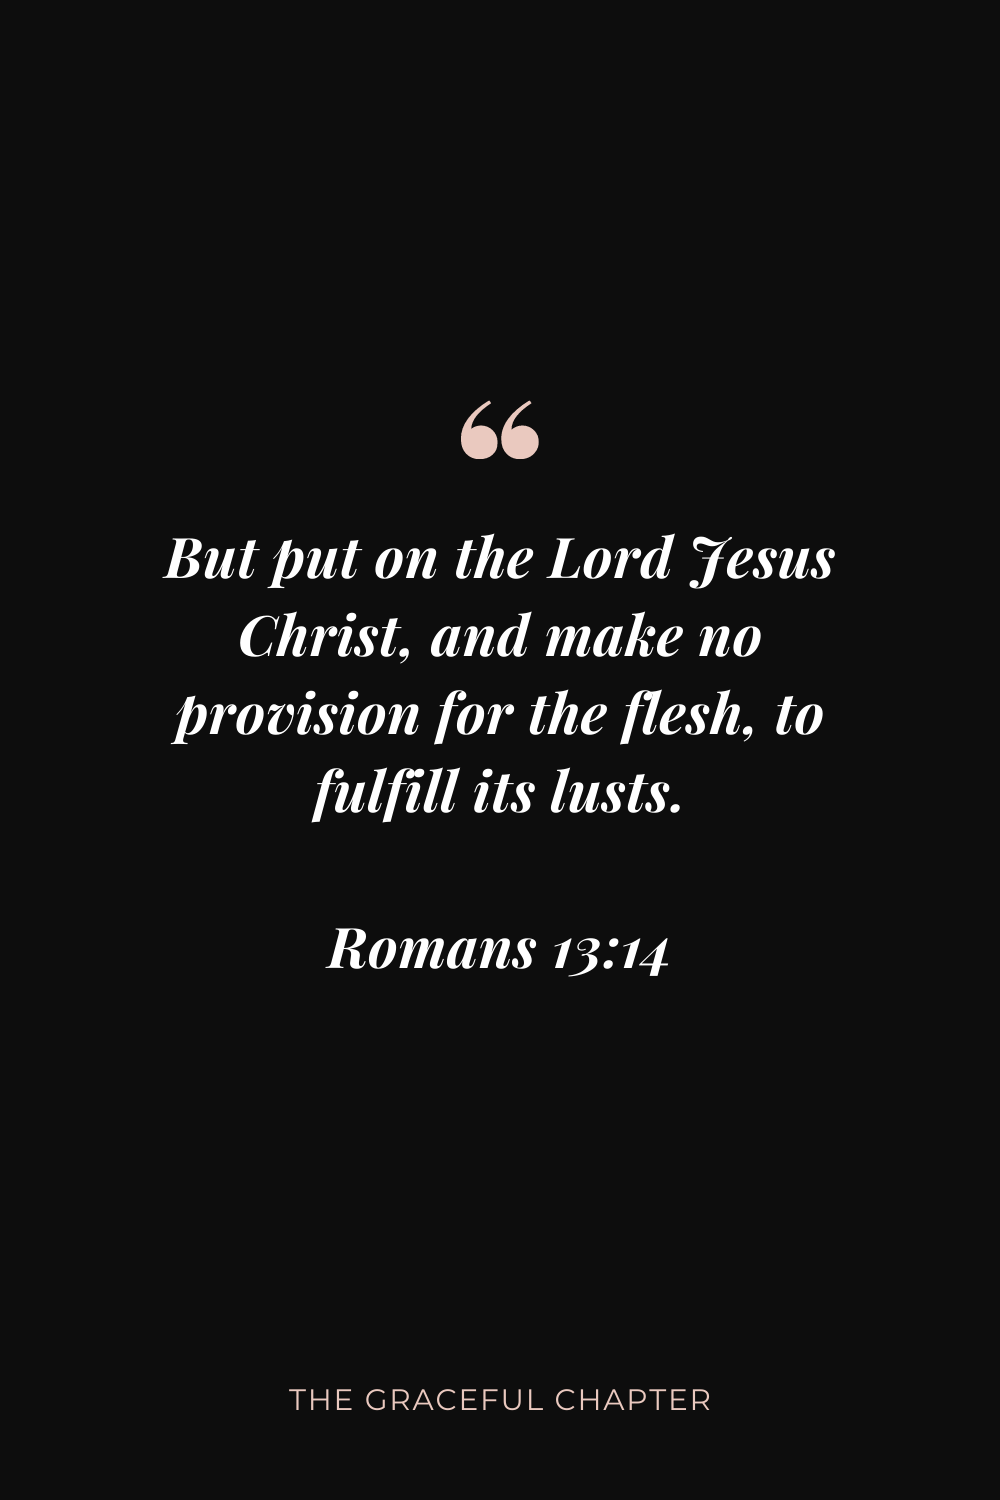 But put on the Lord Jesus Christ, and make no provision for the flesh, to fulfill its lusts. Romans 13:14